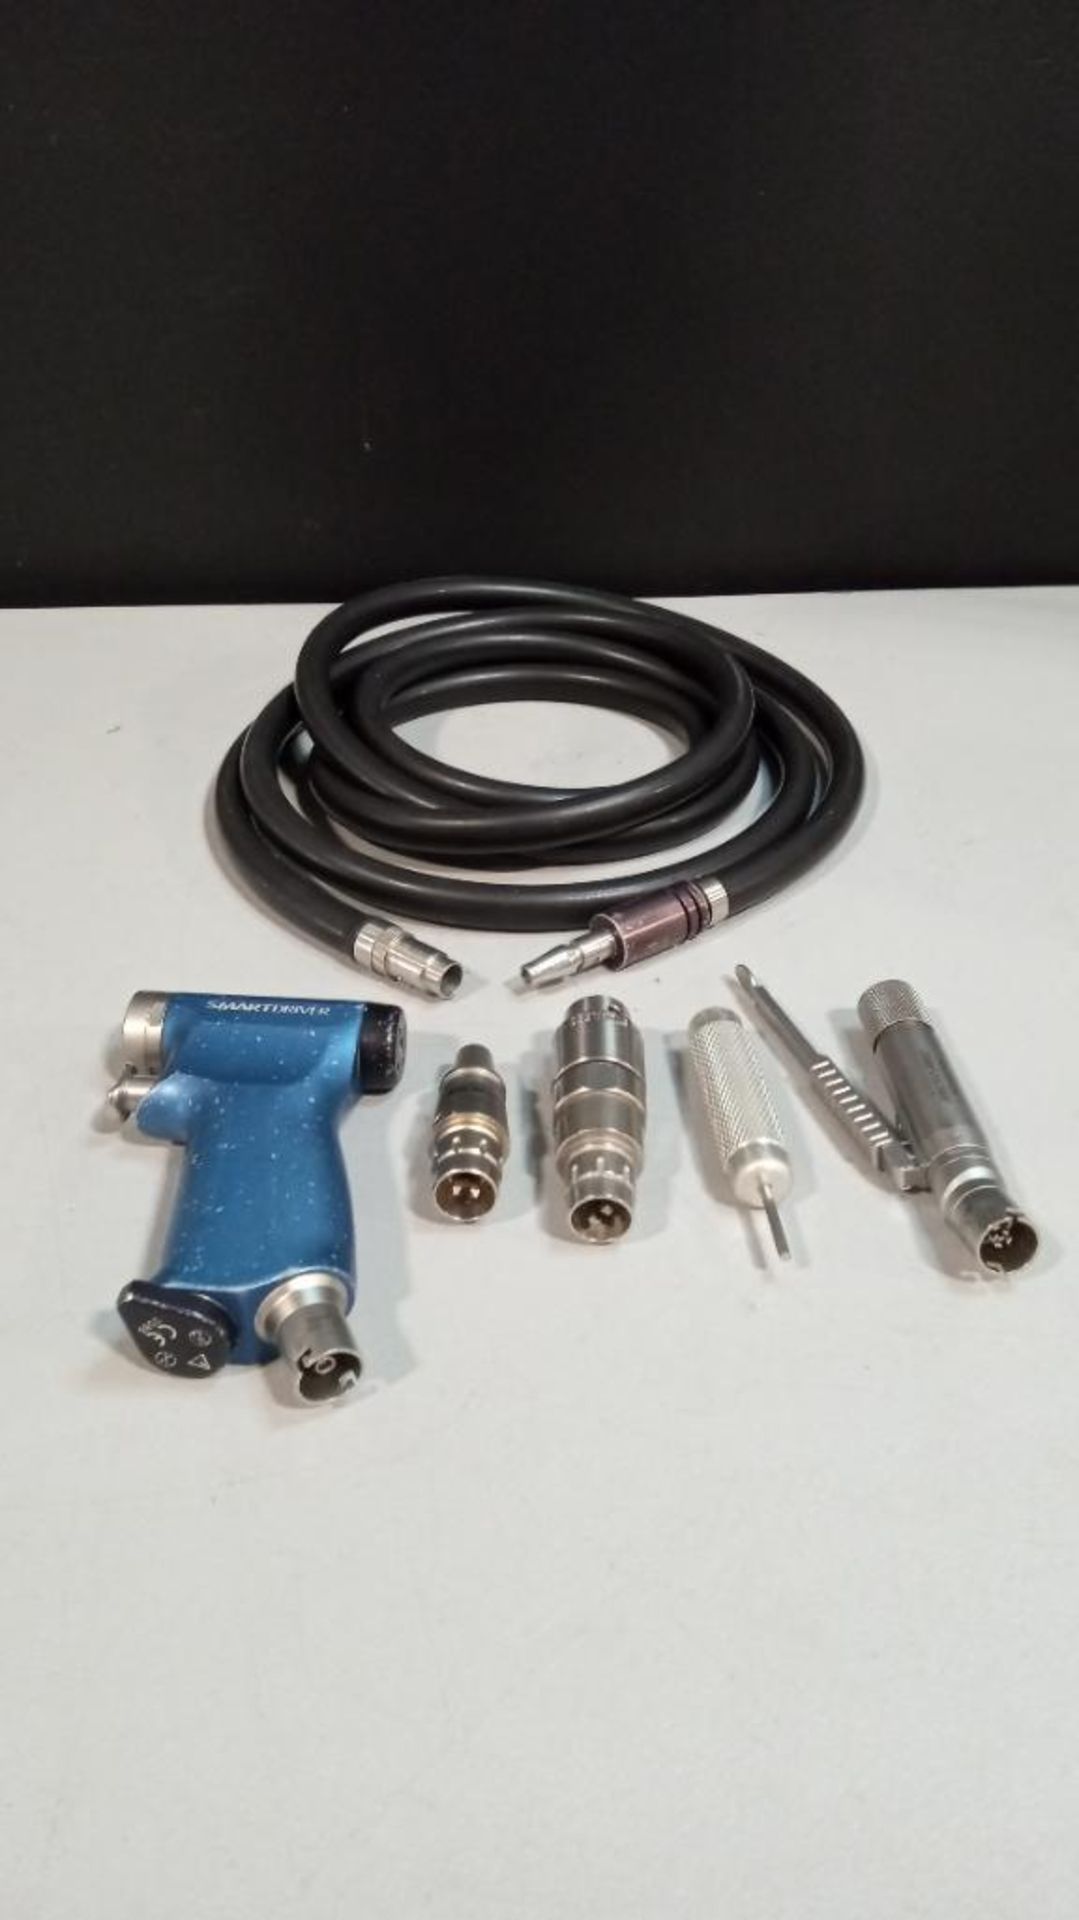 MICROAIRE 6640-100 MICROAIRE 6640-100 SMARTDRIVER PNEUMATIC DRILL SET INCLUDED: -MICROAIRE 9000-000